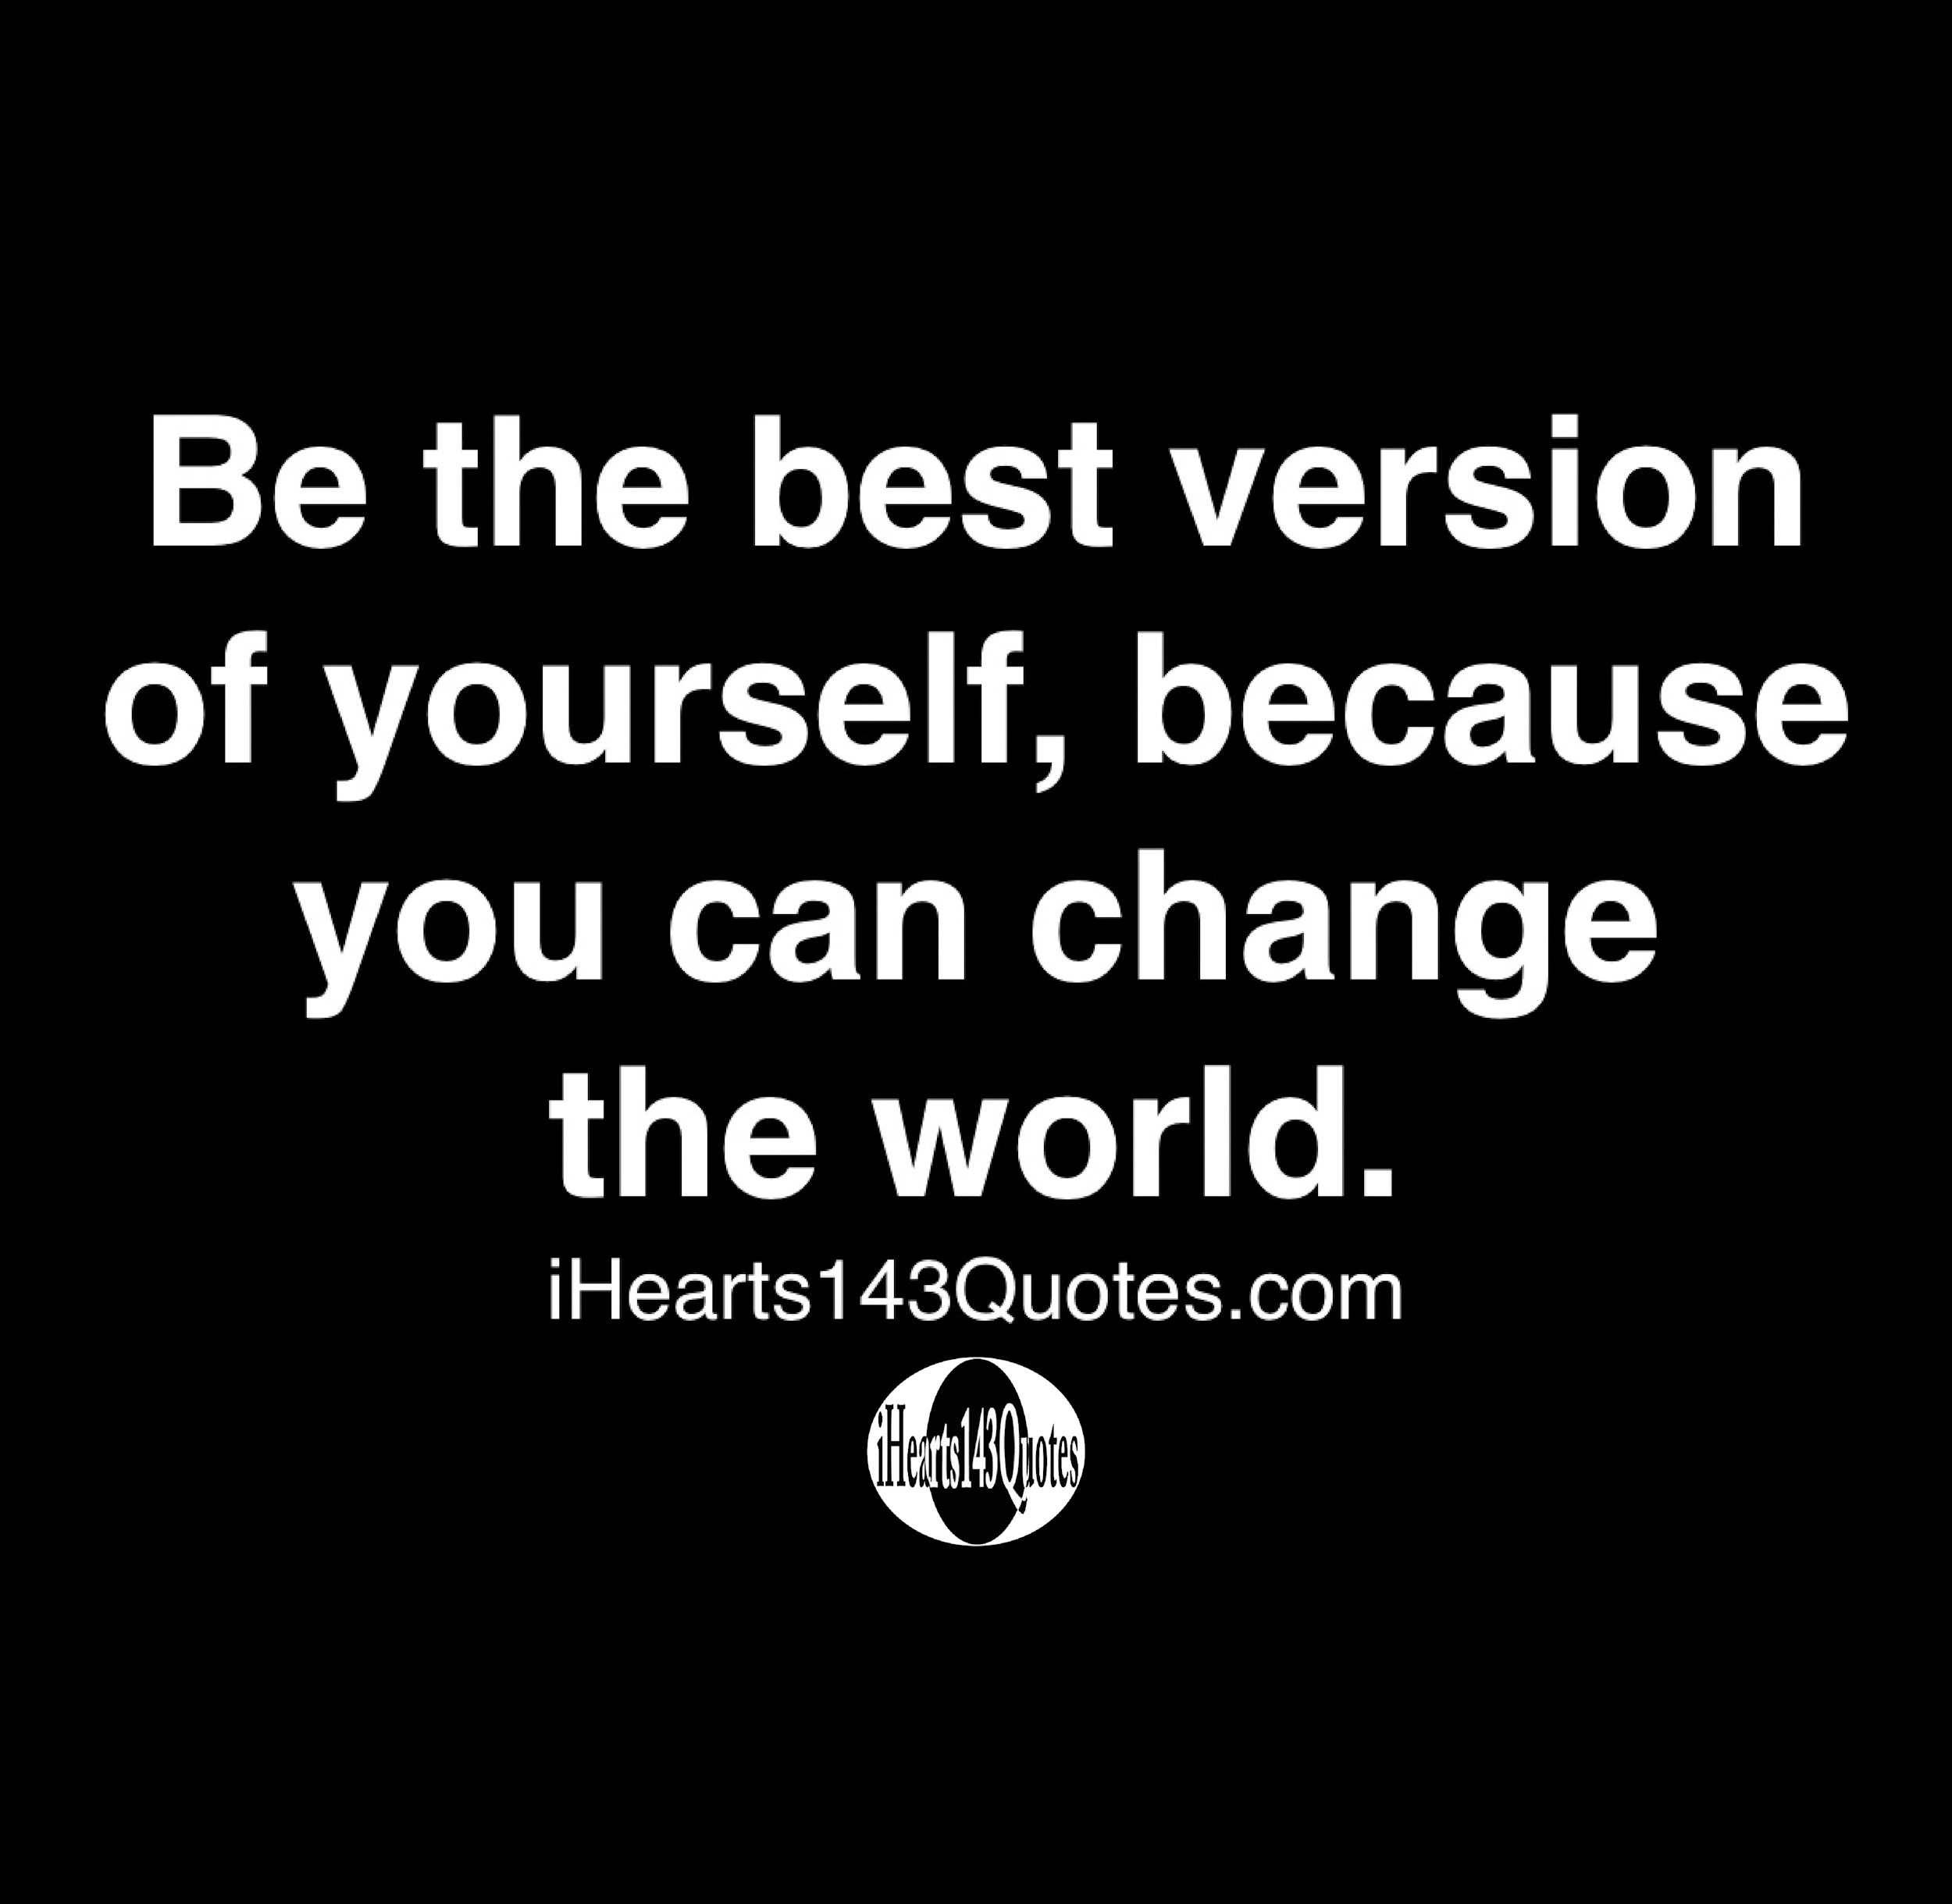 Be the best version of yourself, because you can change the world ...